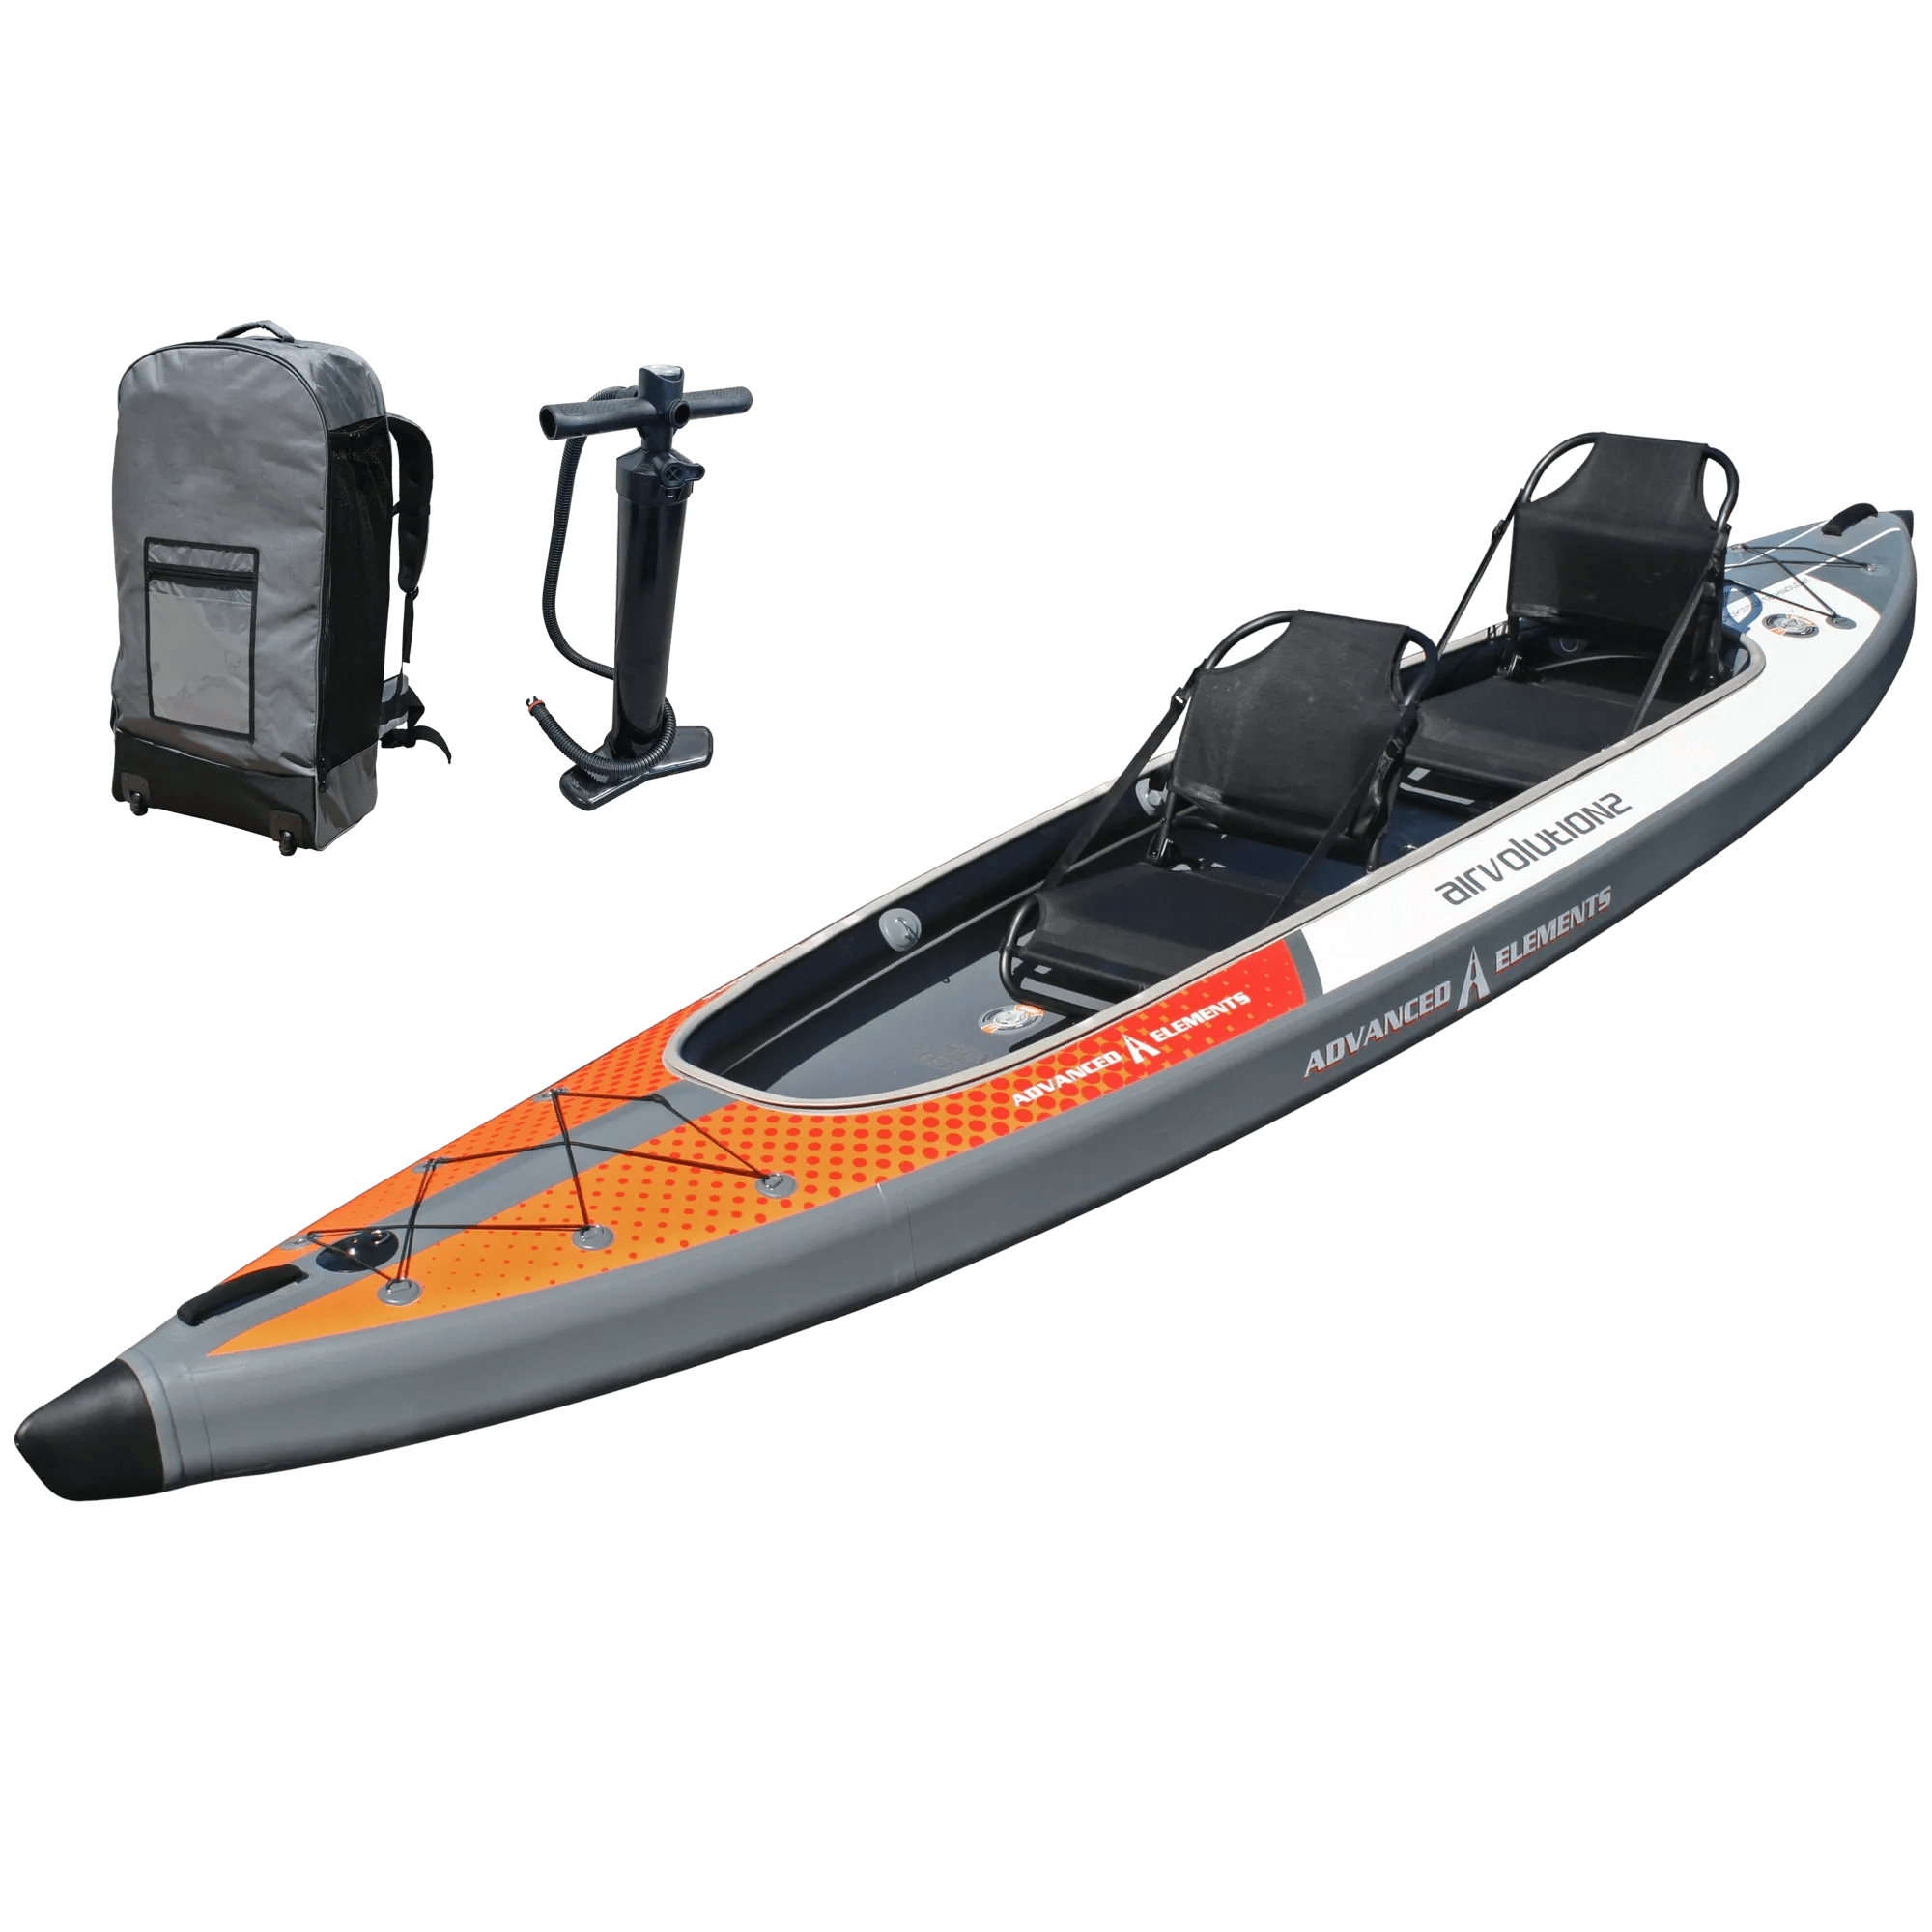 ADVANCED ELEMENTS - AirVolution2™ Pro Recreational Kayak with Pump -  - AE3030-O - 